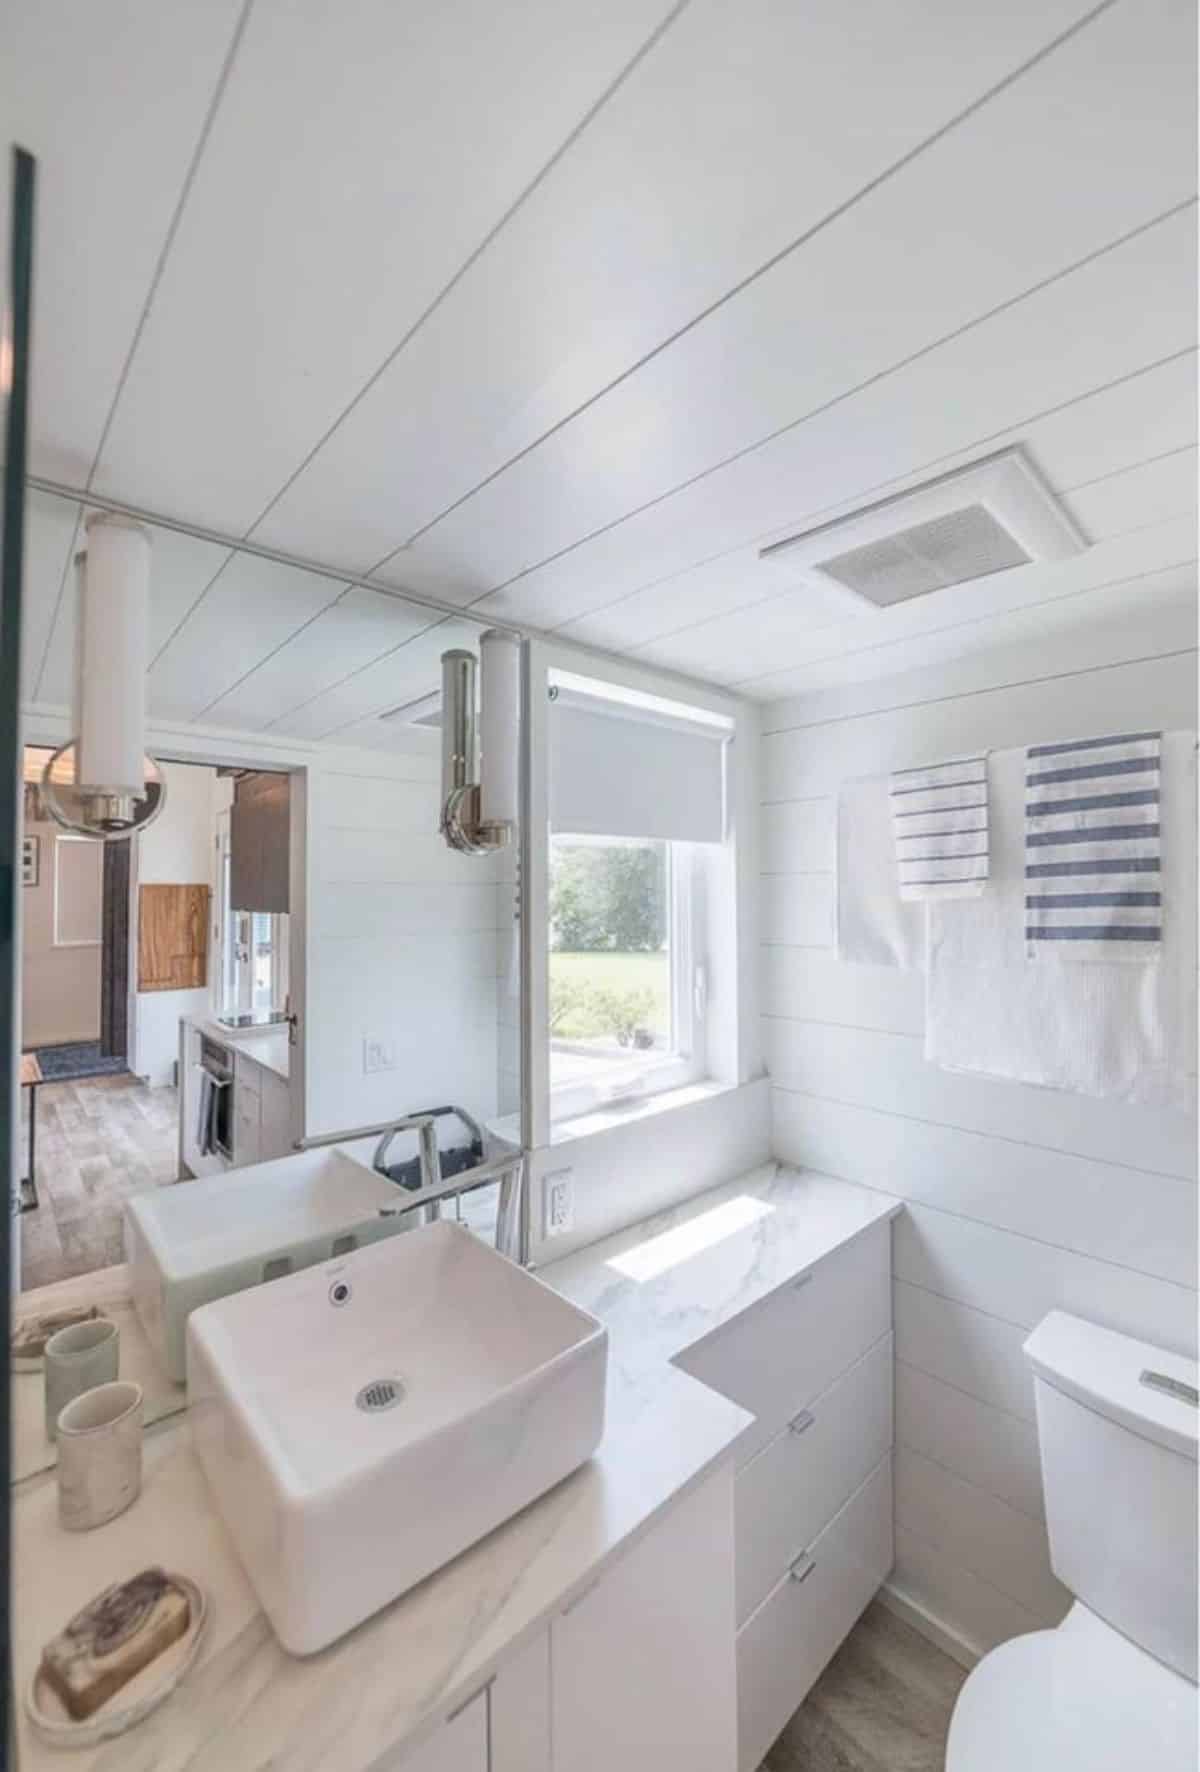 white themed bathroom of tiny house in lakefront community has all the standard fittings